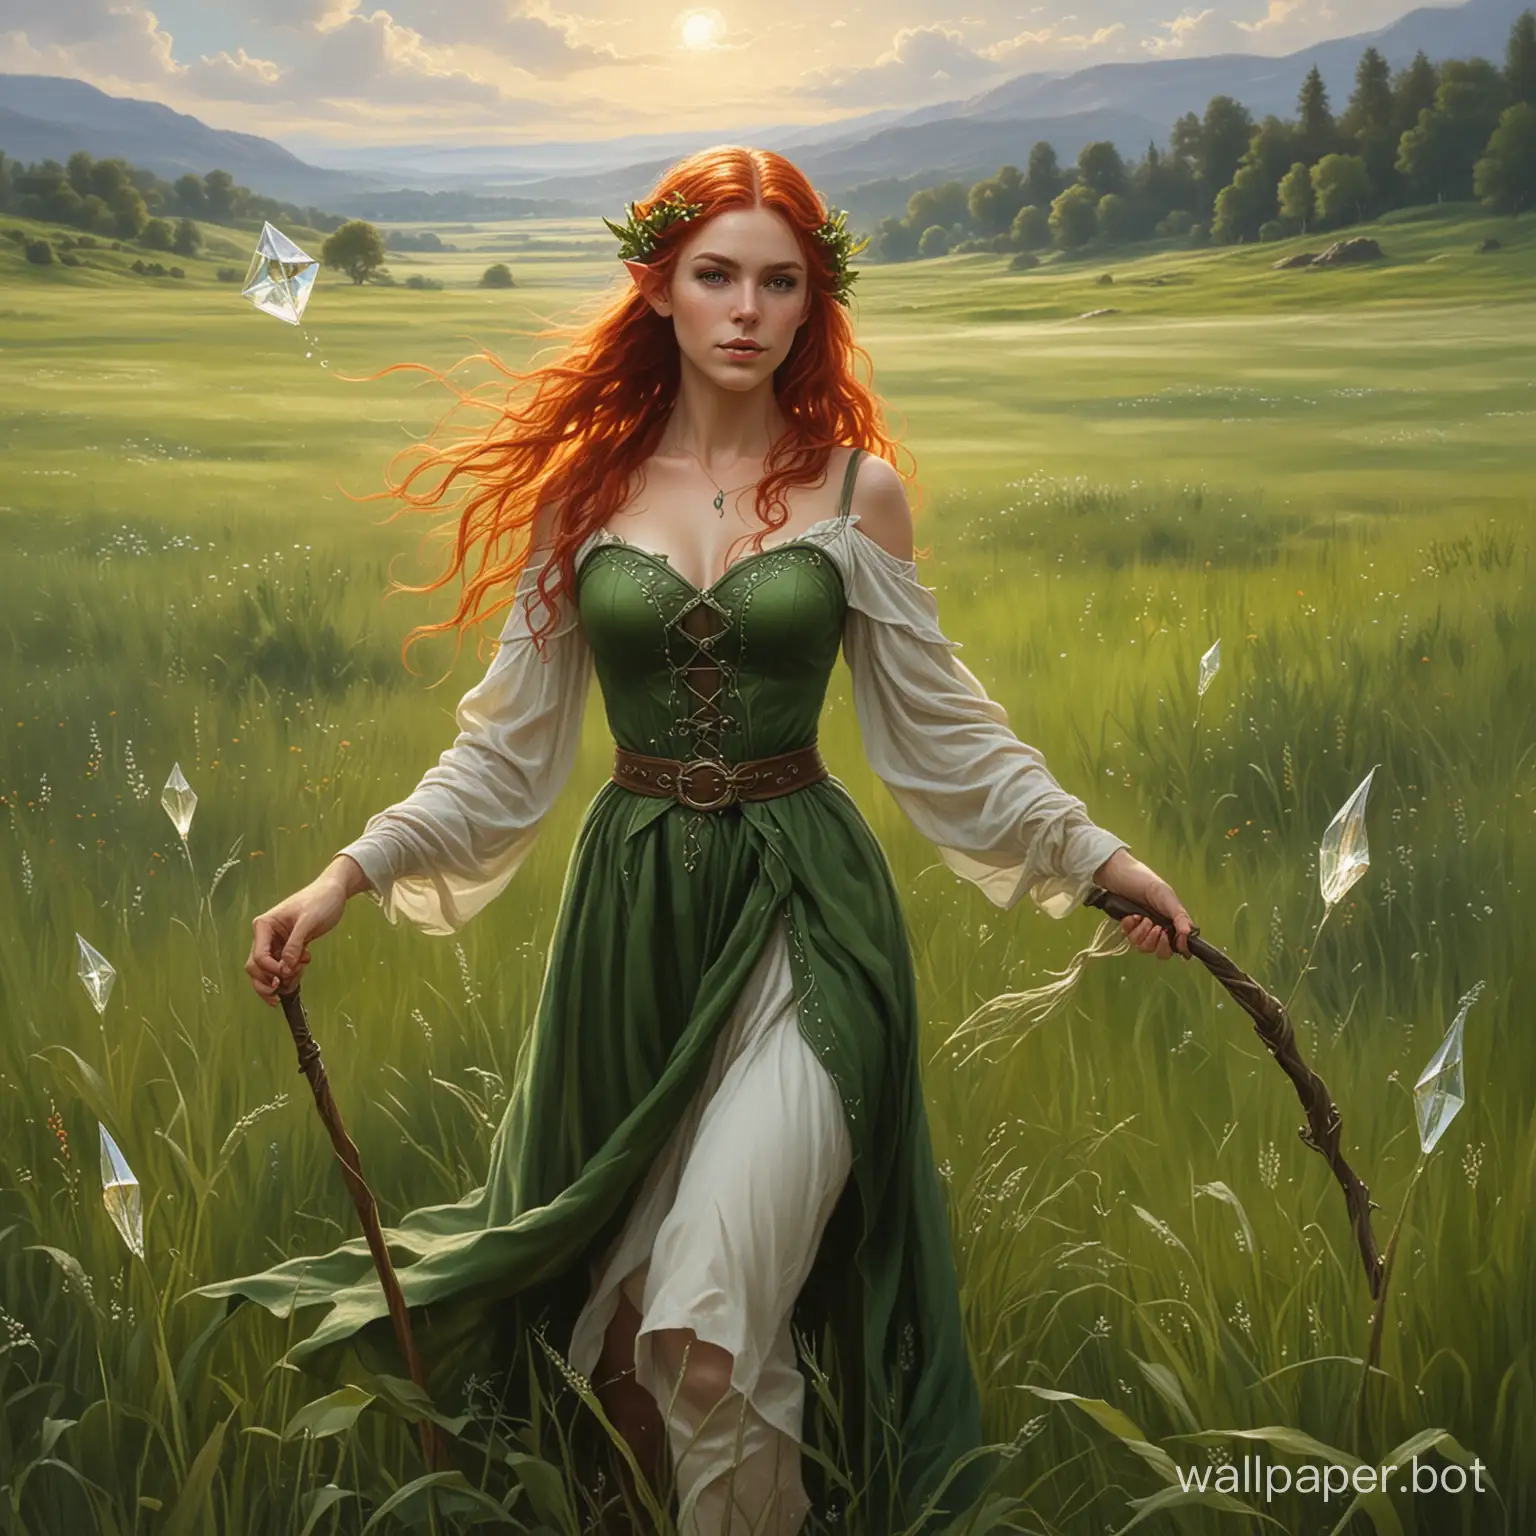 a oil painting of a beautiful elf woman in a a rolling grassy field. she is holding a staff with a crystal at the top. she has red hair